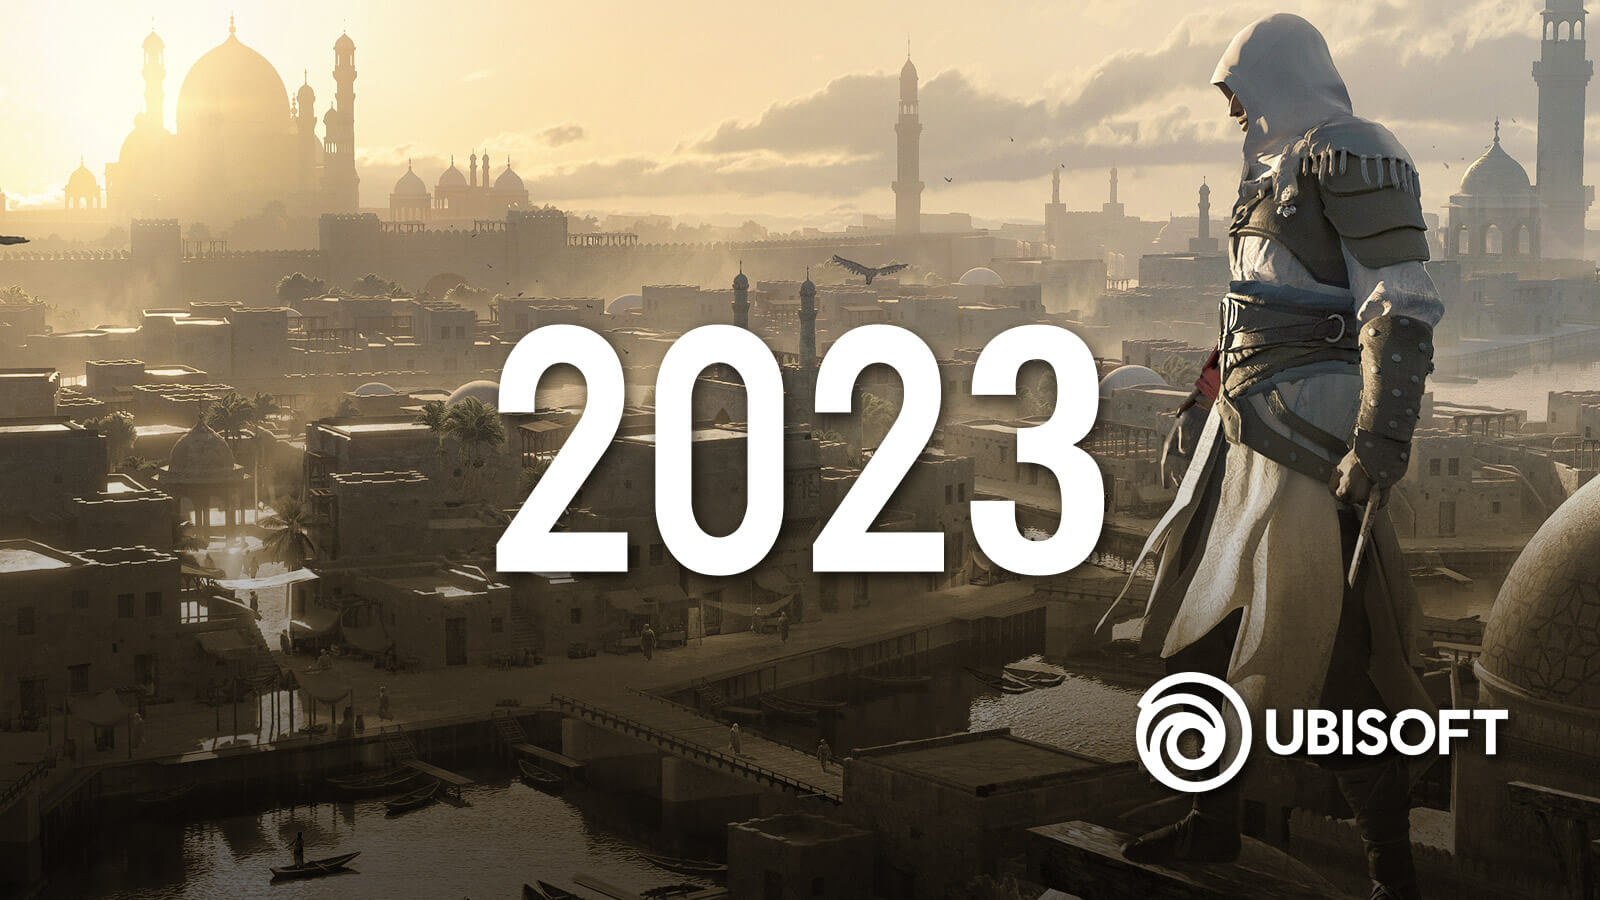 Assassin's Creed Mirage: Will the next installment be released in August  2023? - Hindustan Times